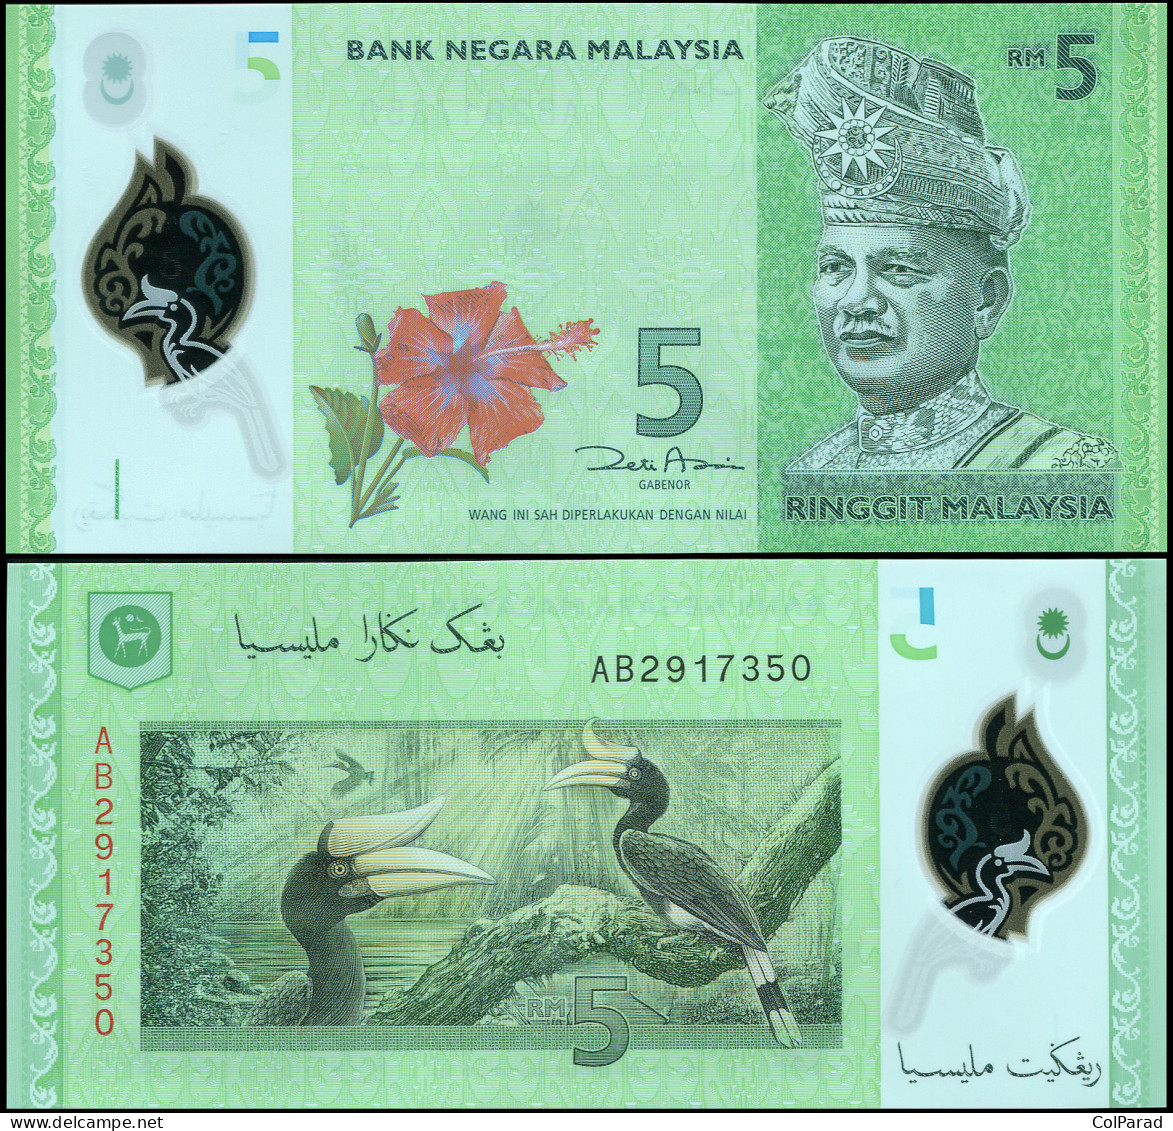 MALAYSIA 5 RINGGIT - ND (2012) - Polymer Unc - P.52a Banknote - Malesia